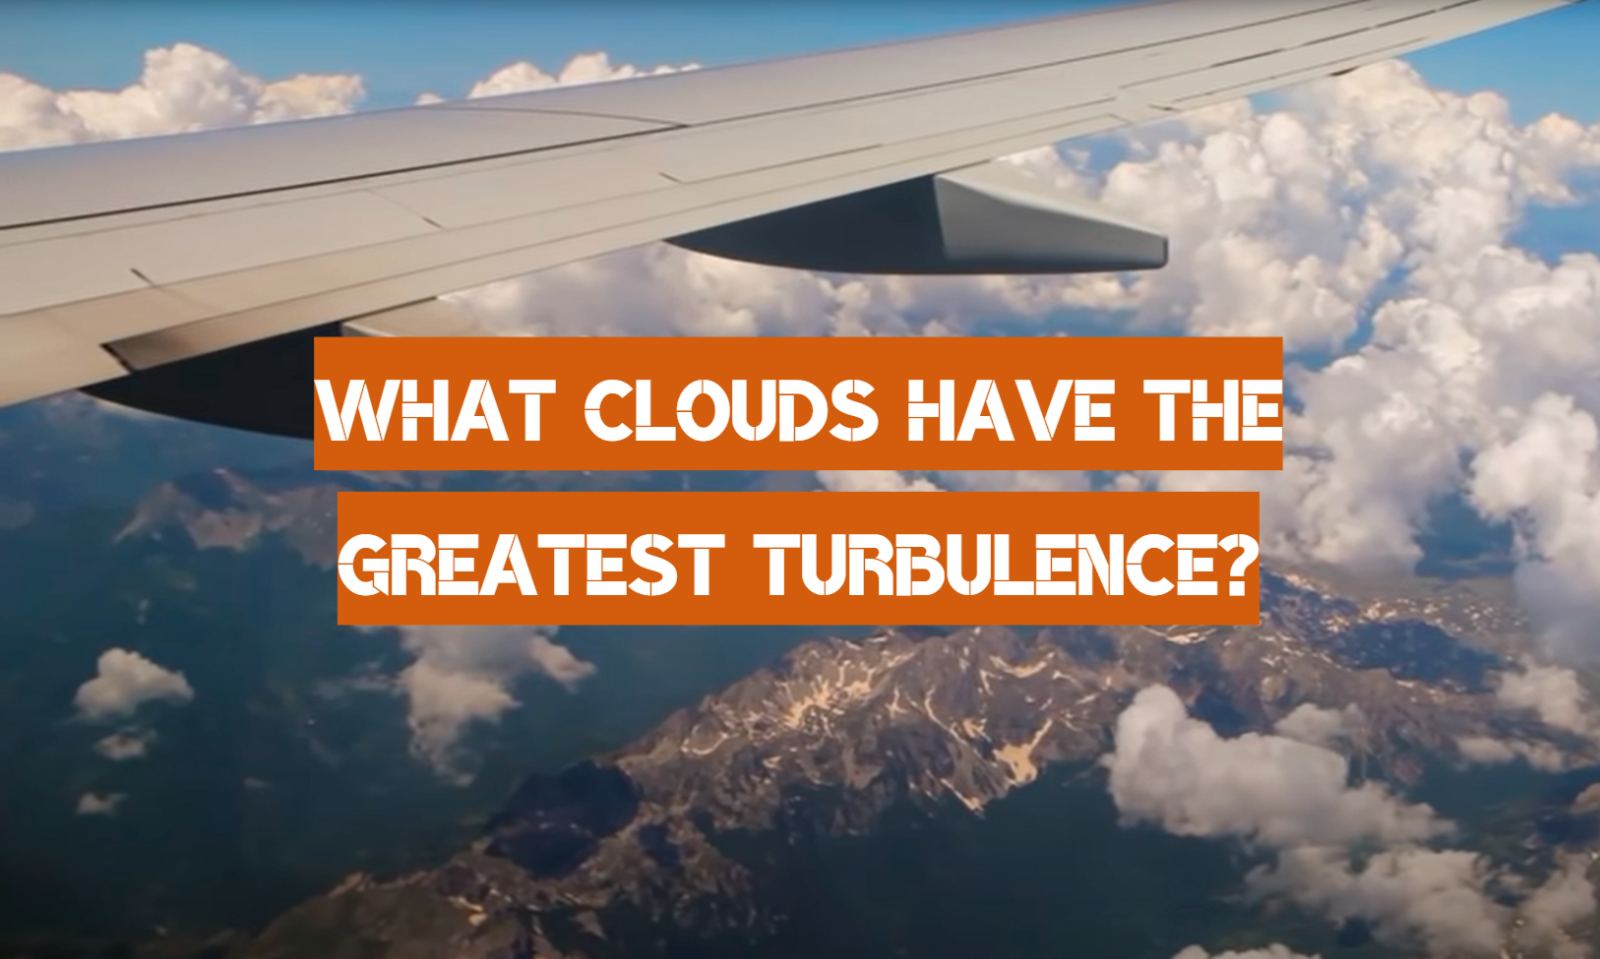 What Clouds Have the Greatest Turbulence?